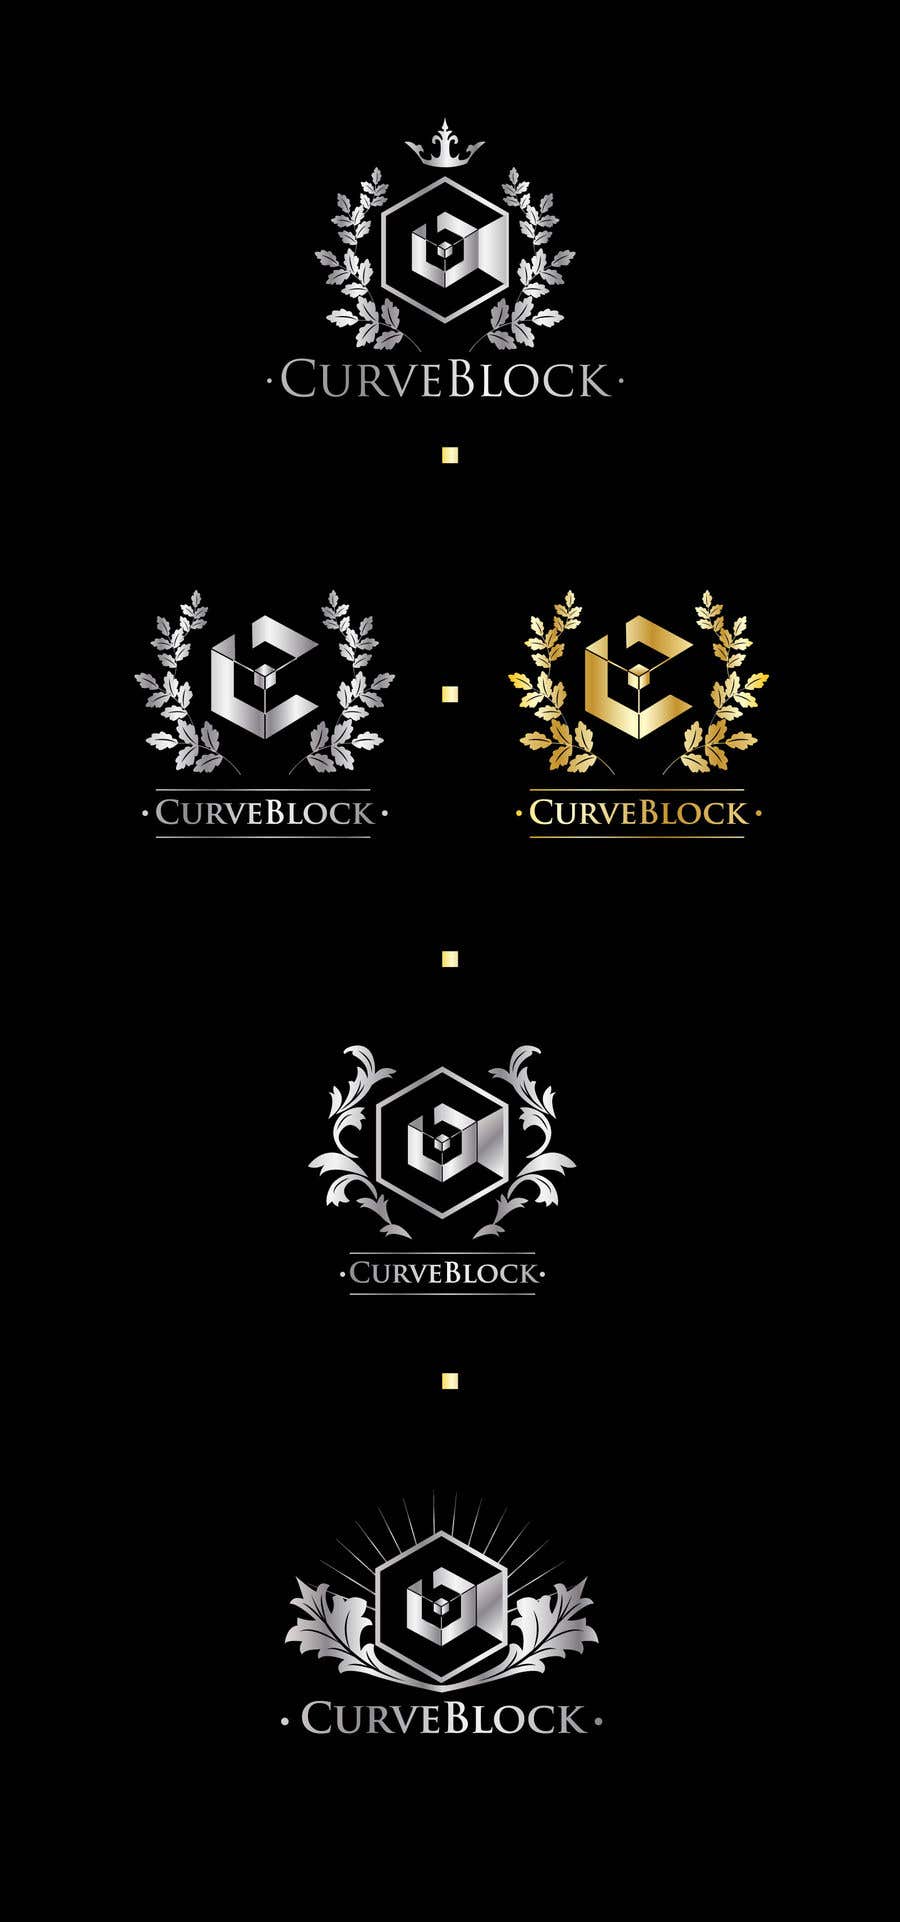 Proposition n°56 du concours                                                 We need a luxury logo designed for CurveBlock, CurveBlock is a Real Estate Developments company within the blockchain sector, some examples are attached, ideally we’d like the logo in Gold or Silver.
                                            